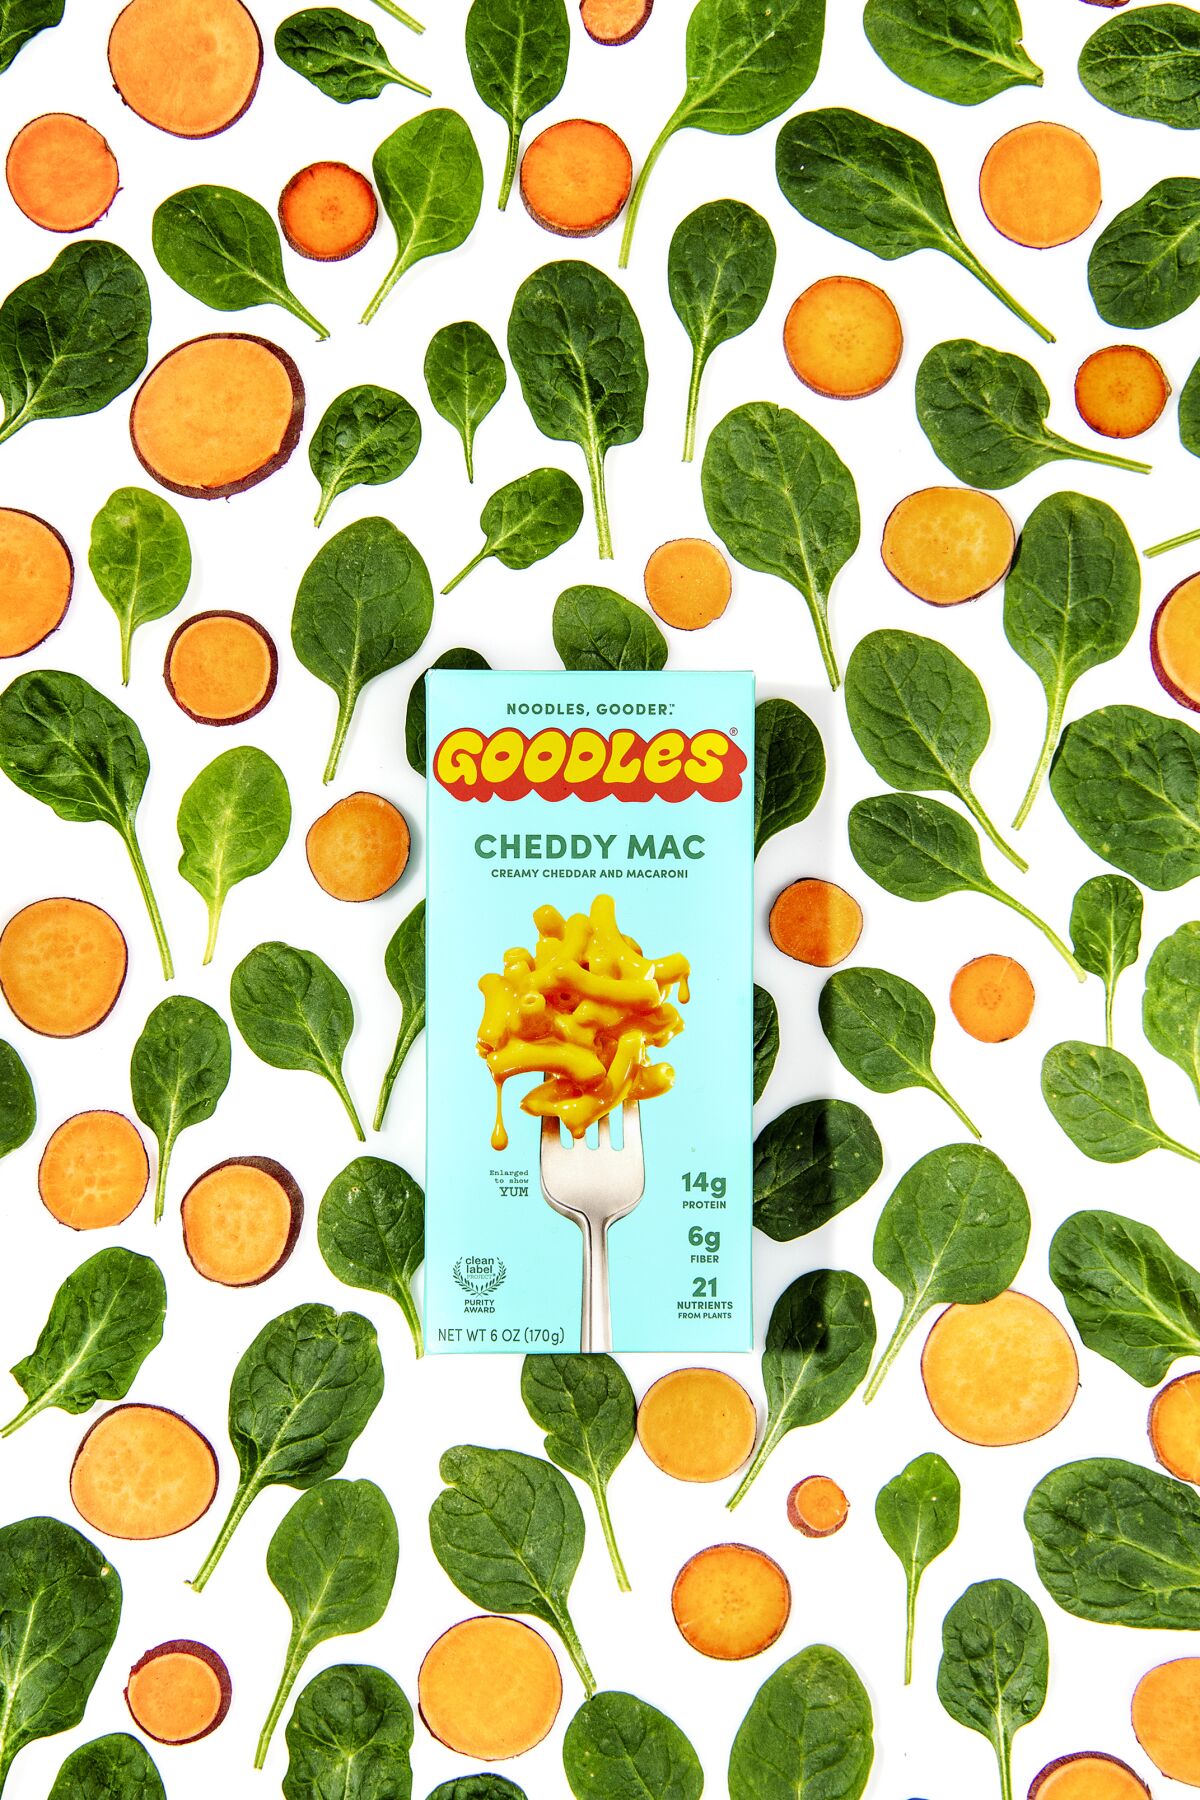 Goodles Cheddy Mac with hidden spinach and sweet potato in every box.